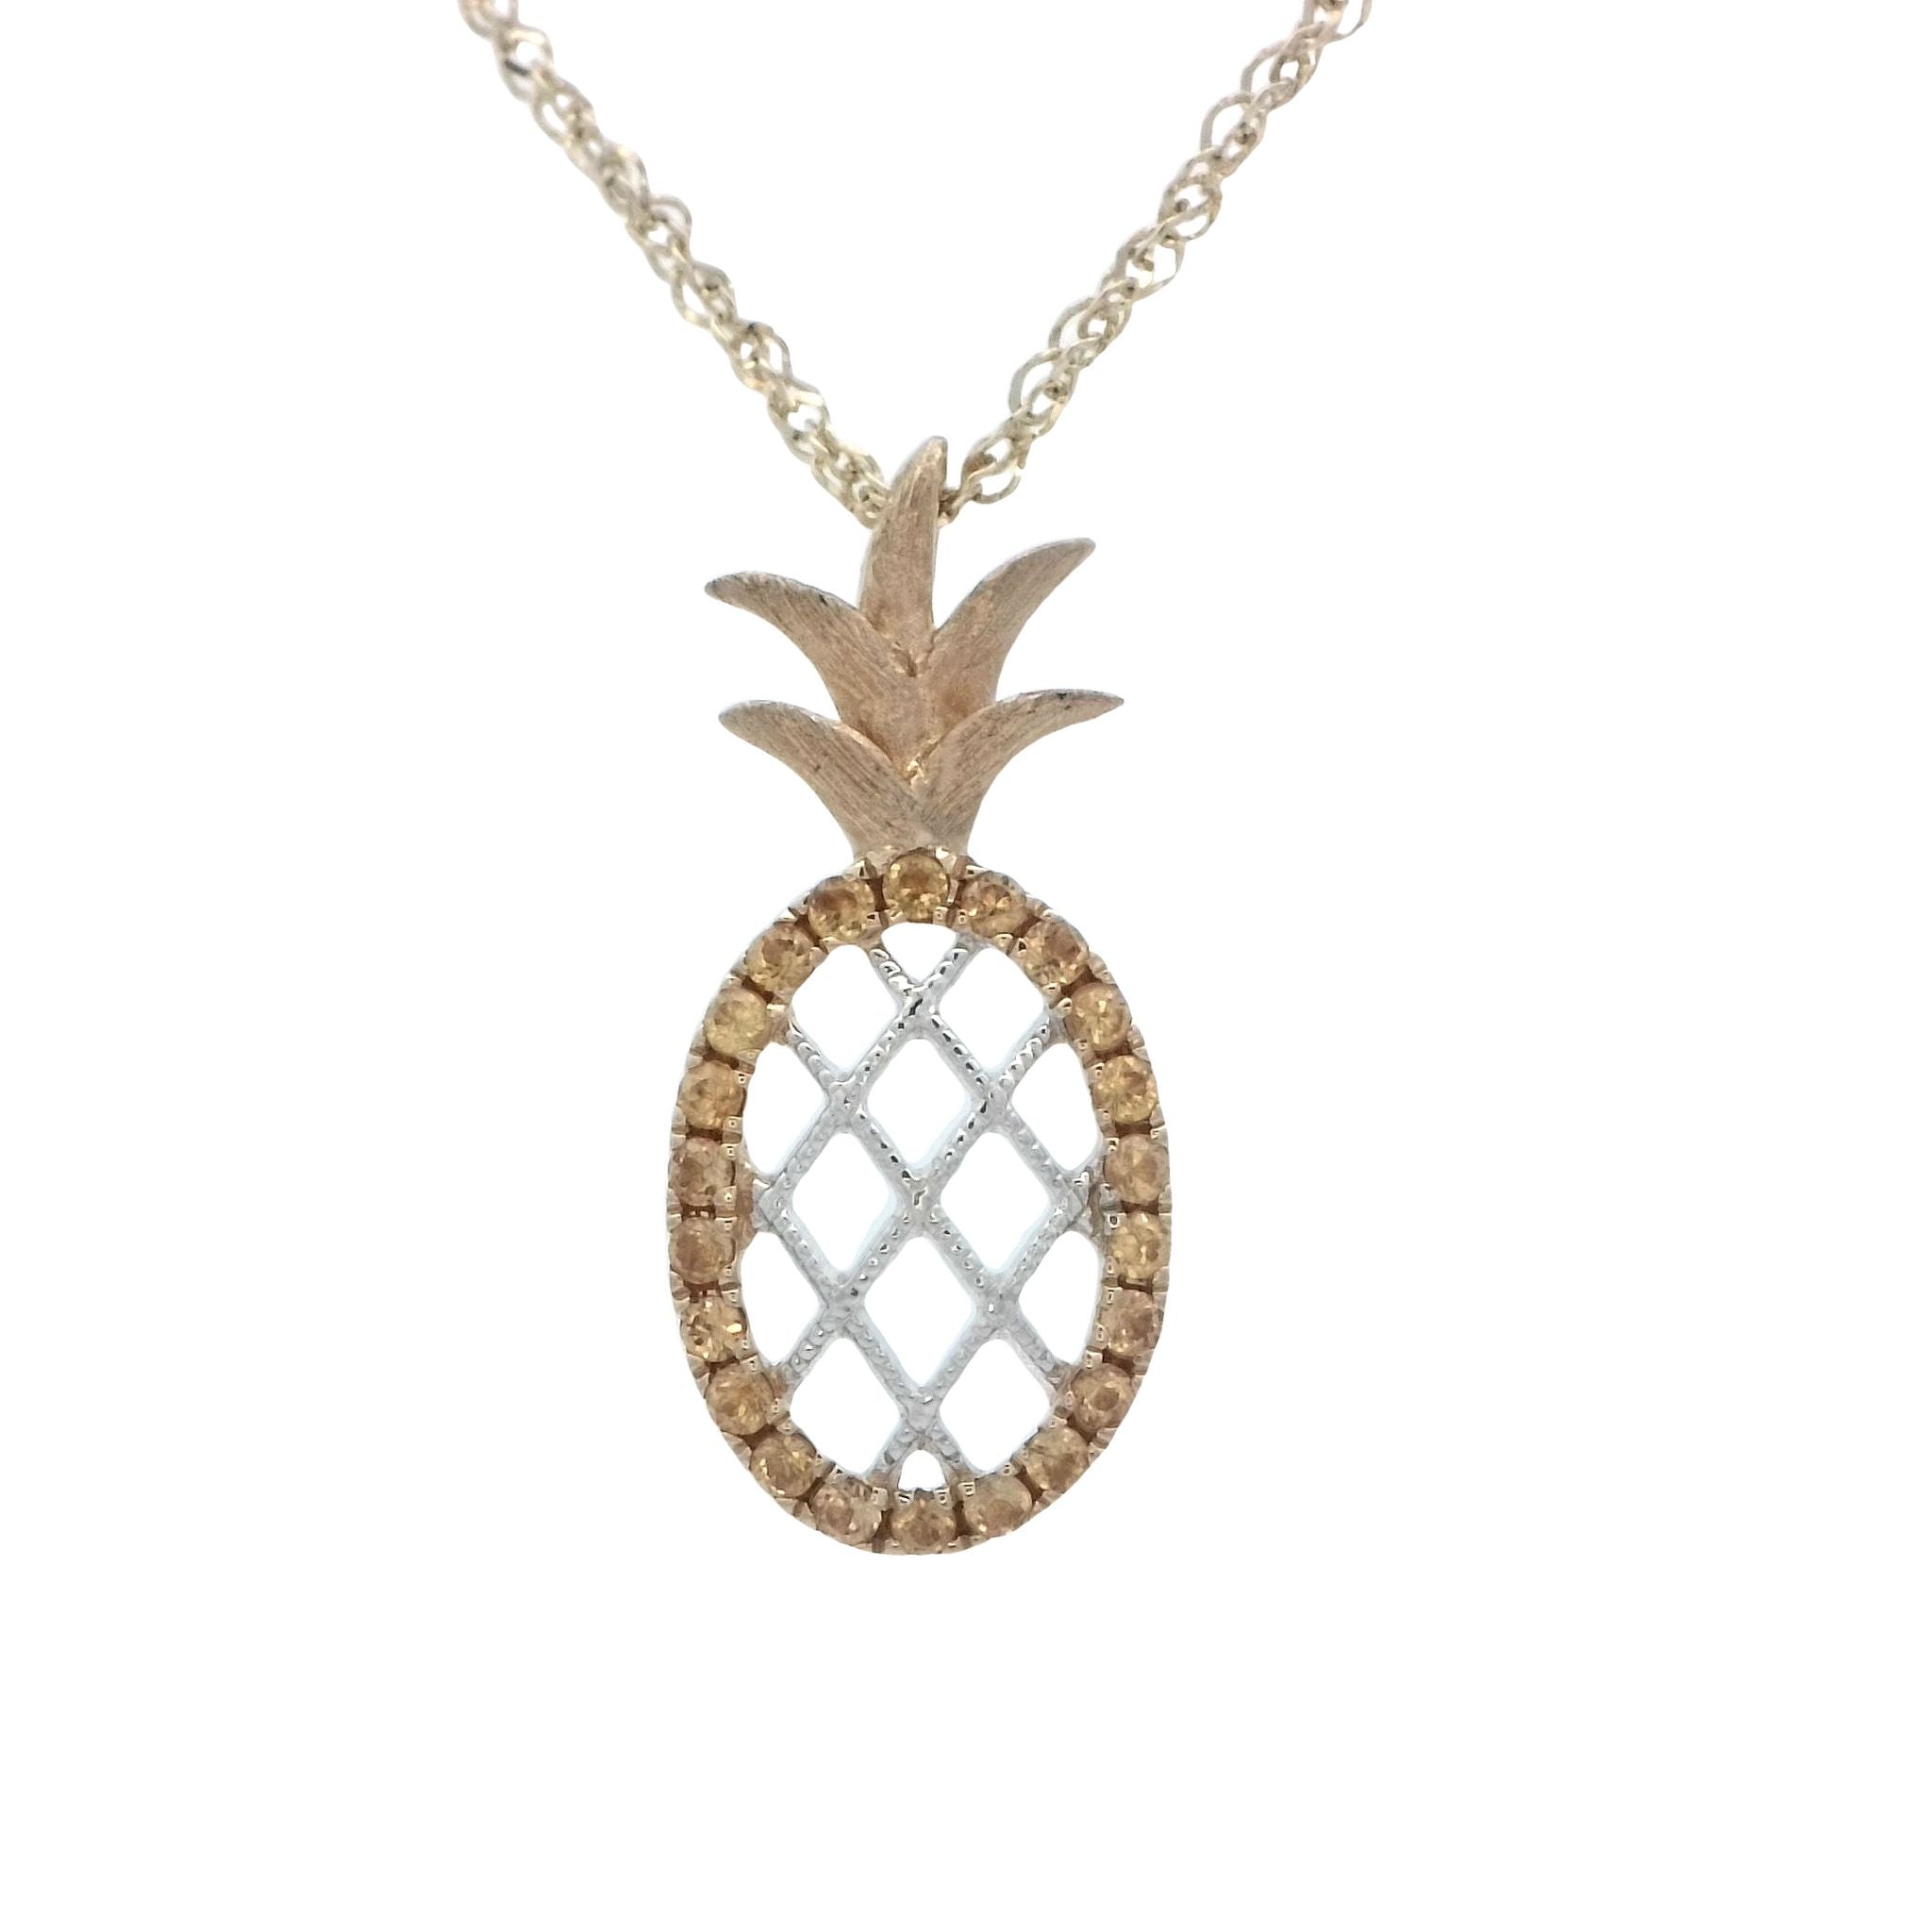 Pineapple Pendant in Yellow Gold